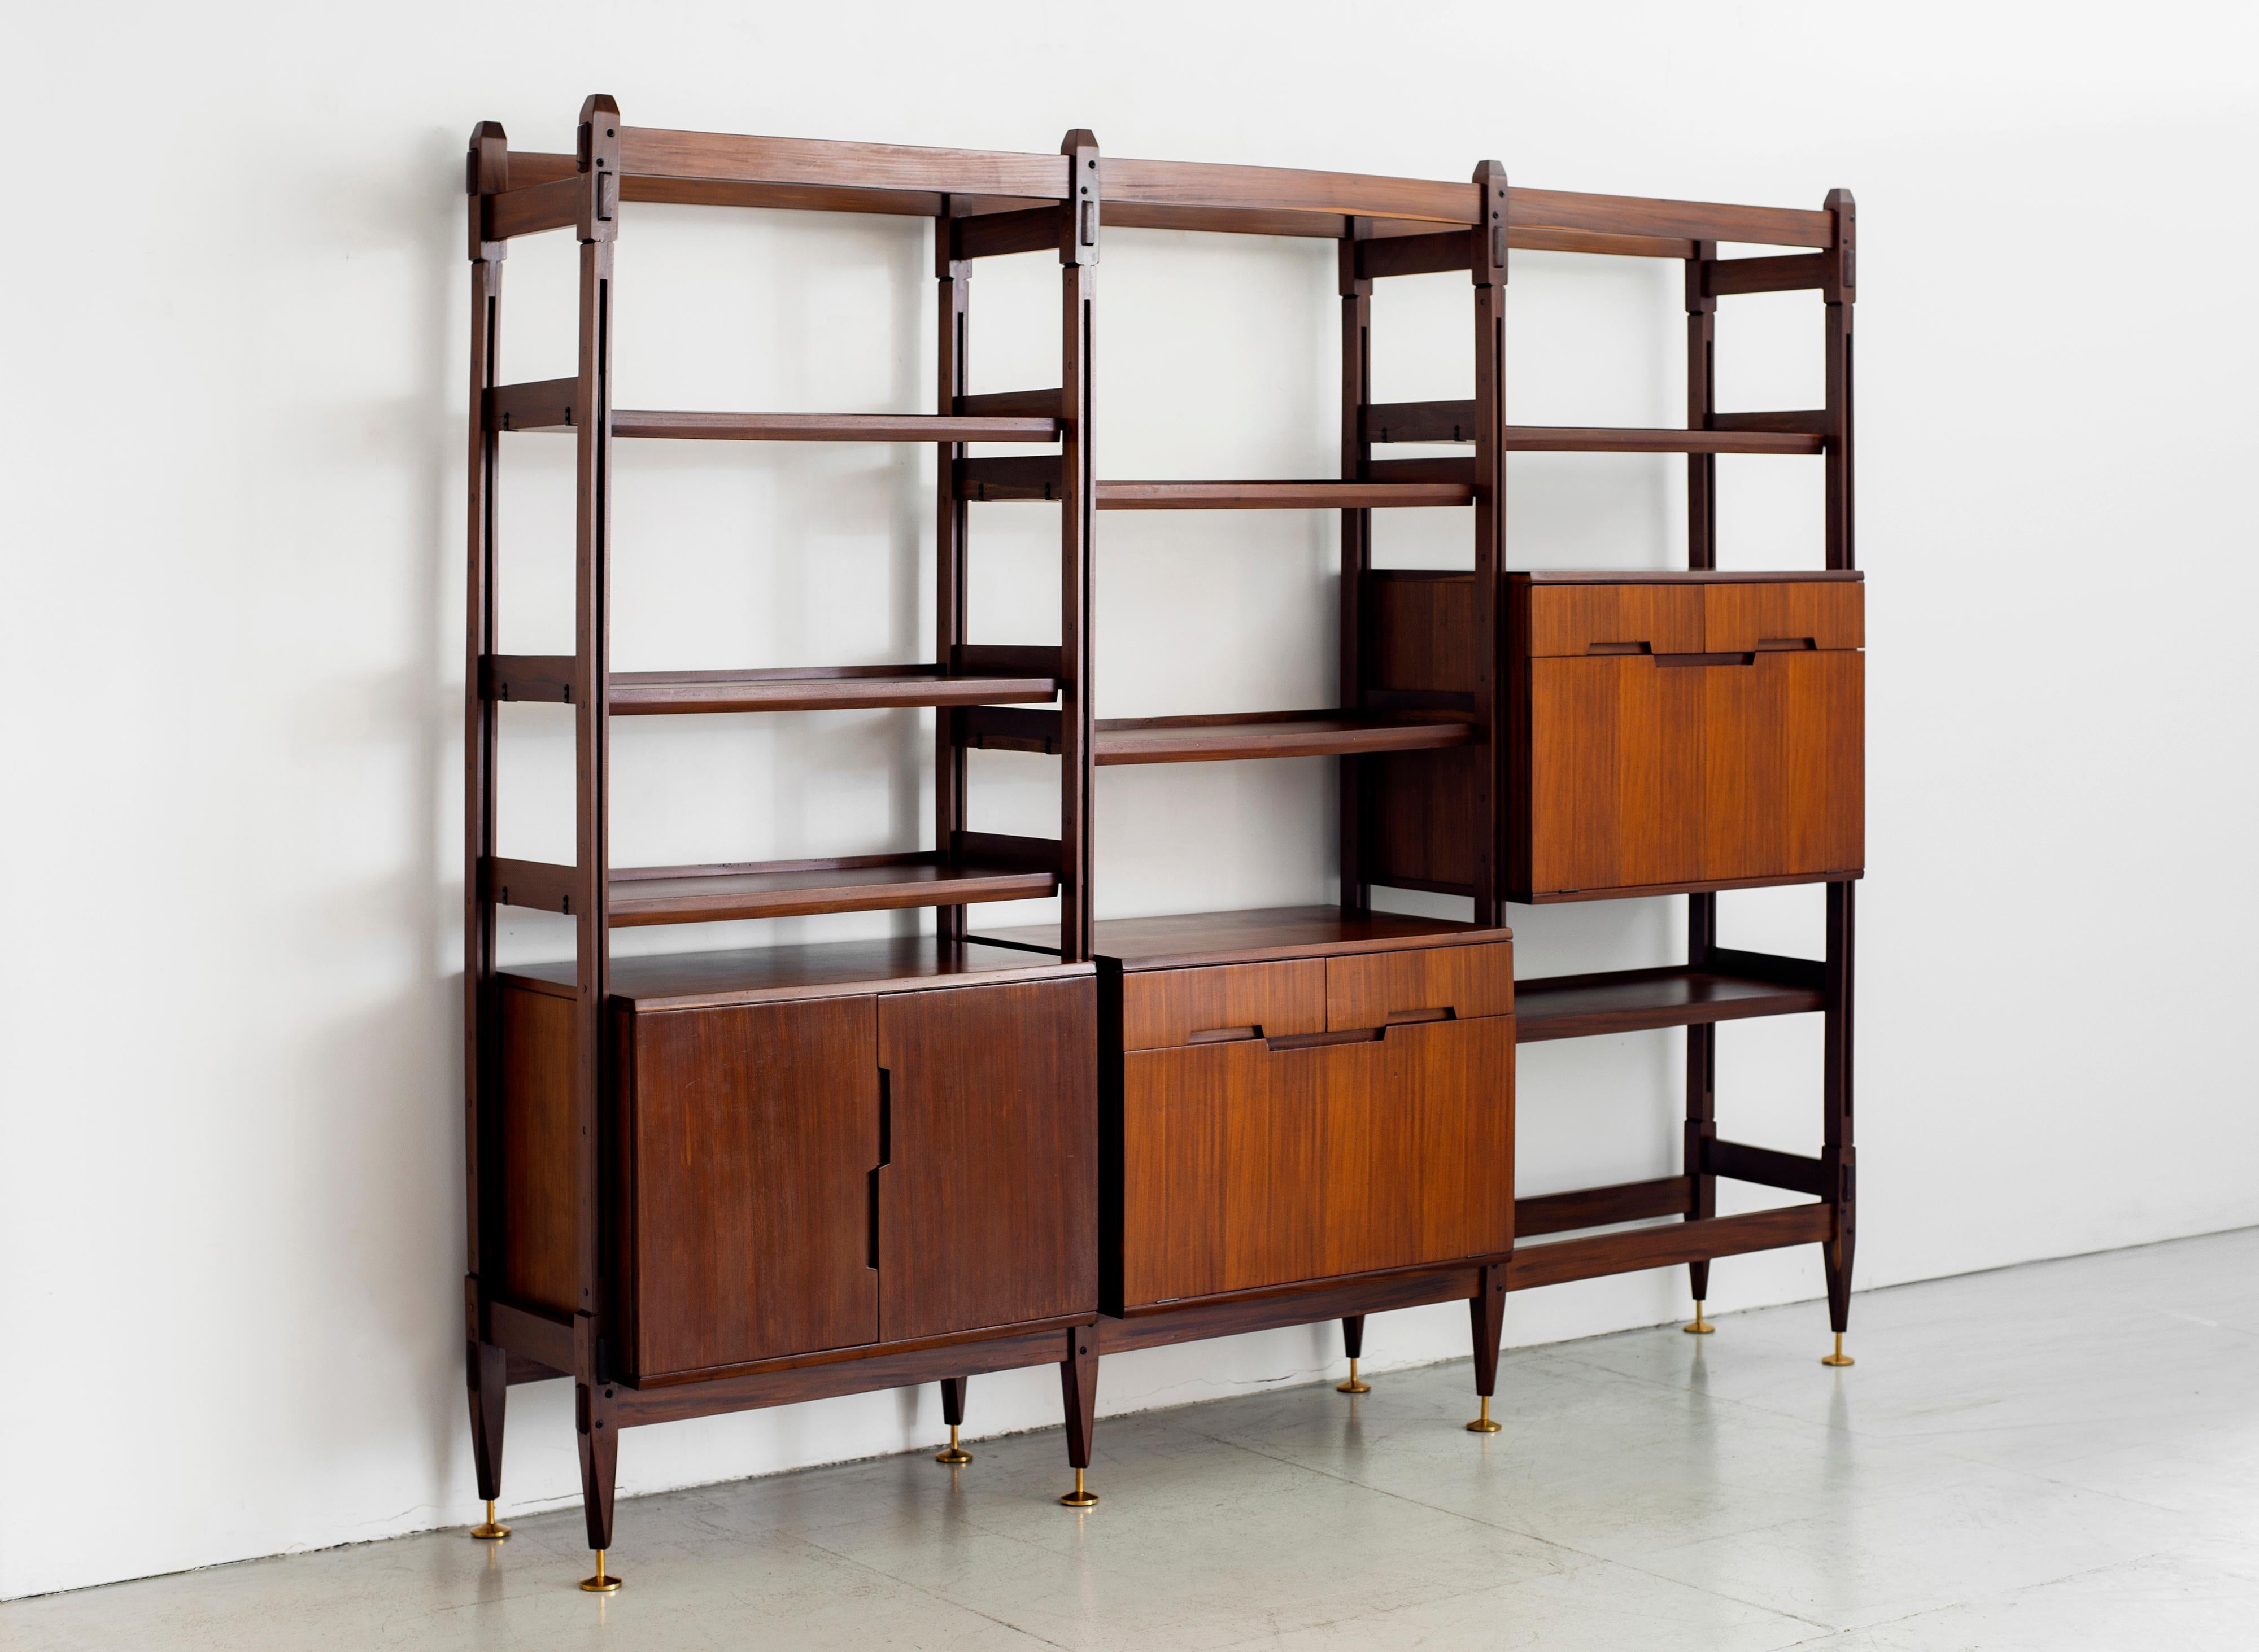 1960s Italian teak free floating wall unit / bookcase with multiple shelves and compartments for storage. 
Fantastic over sized brass feet.
Original patina to wood. 

Measures: W 100” x D 16” x H 83.25”.